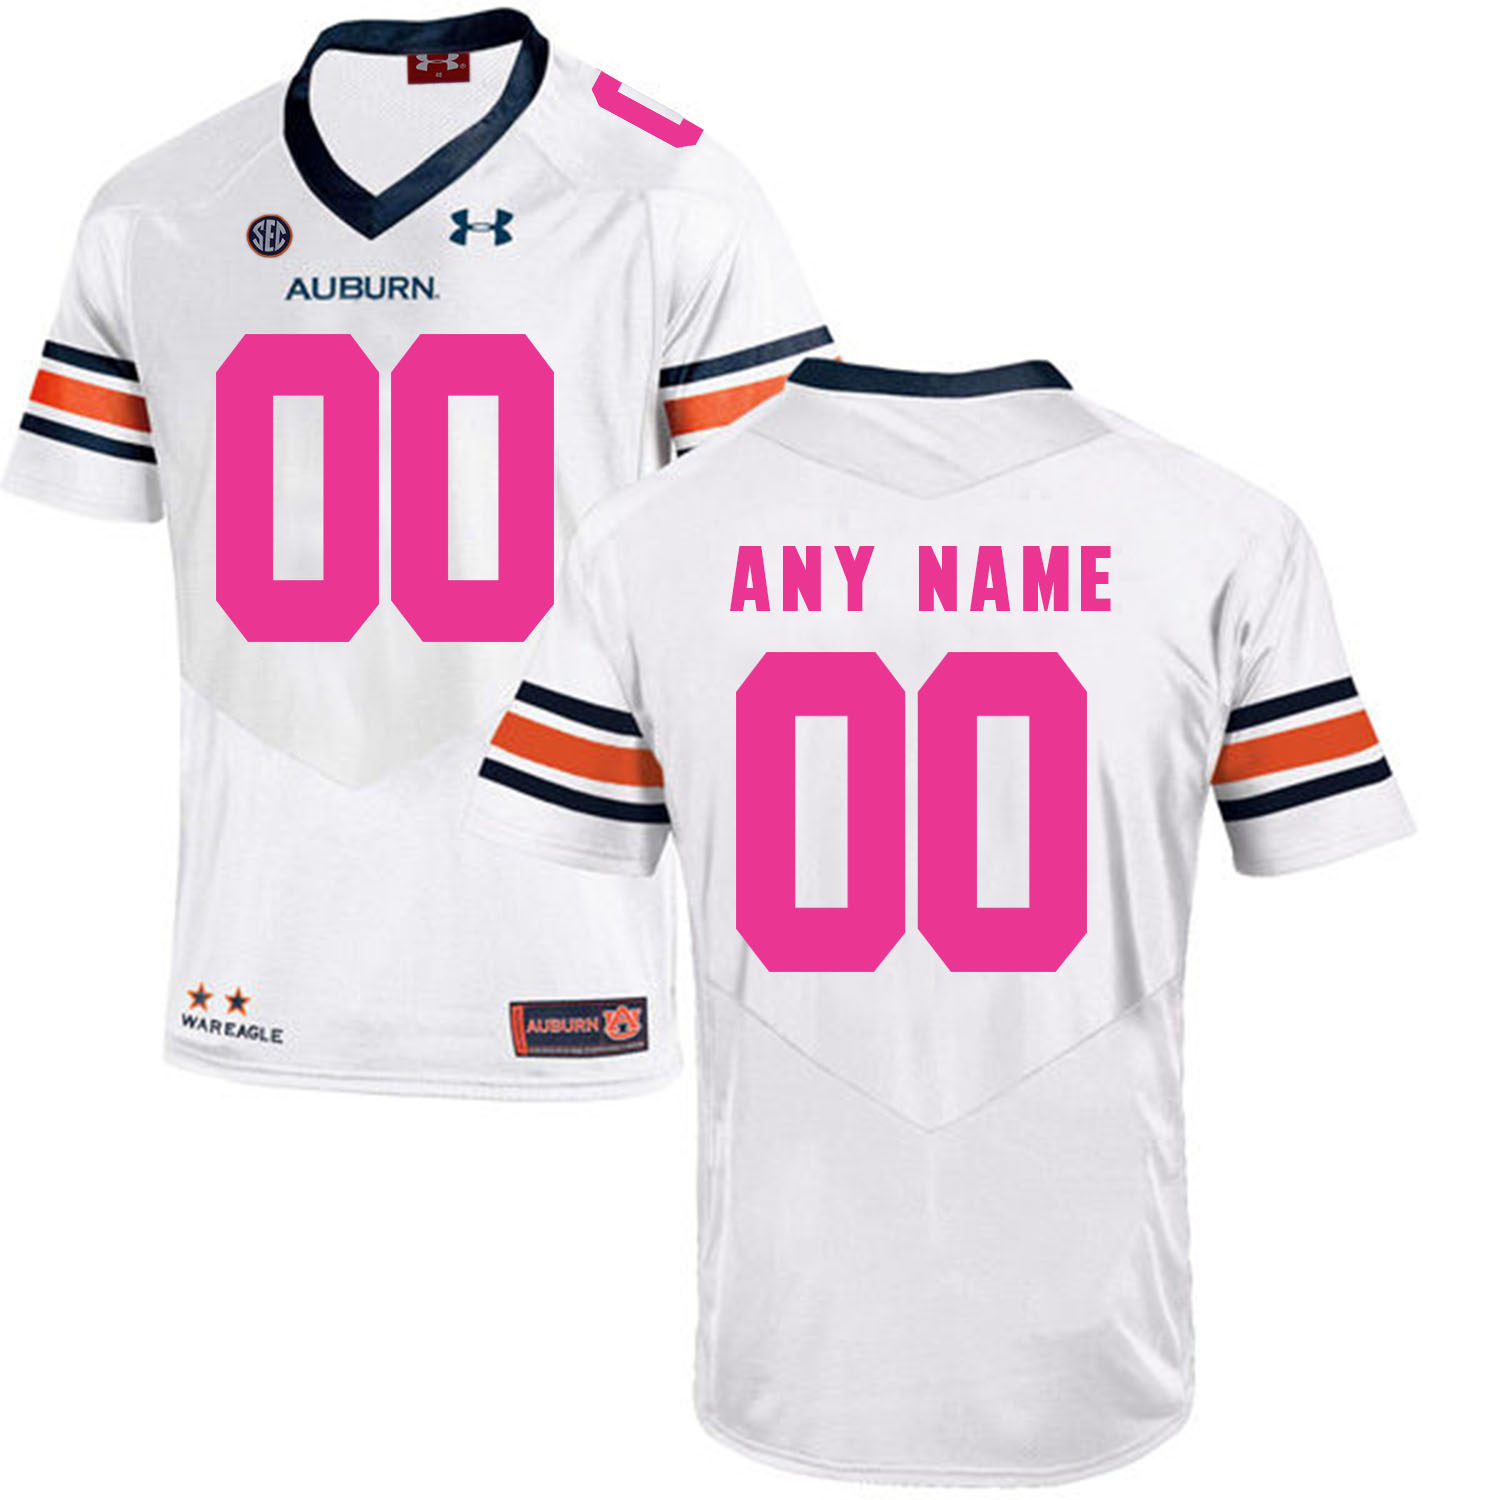 Auburn Tigers White Men's Customized 2018 Breast Cancer Awareness College Football Jersey